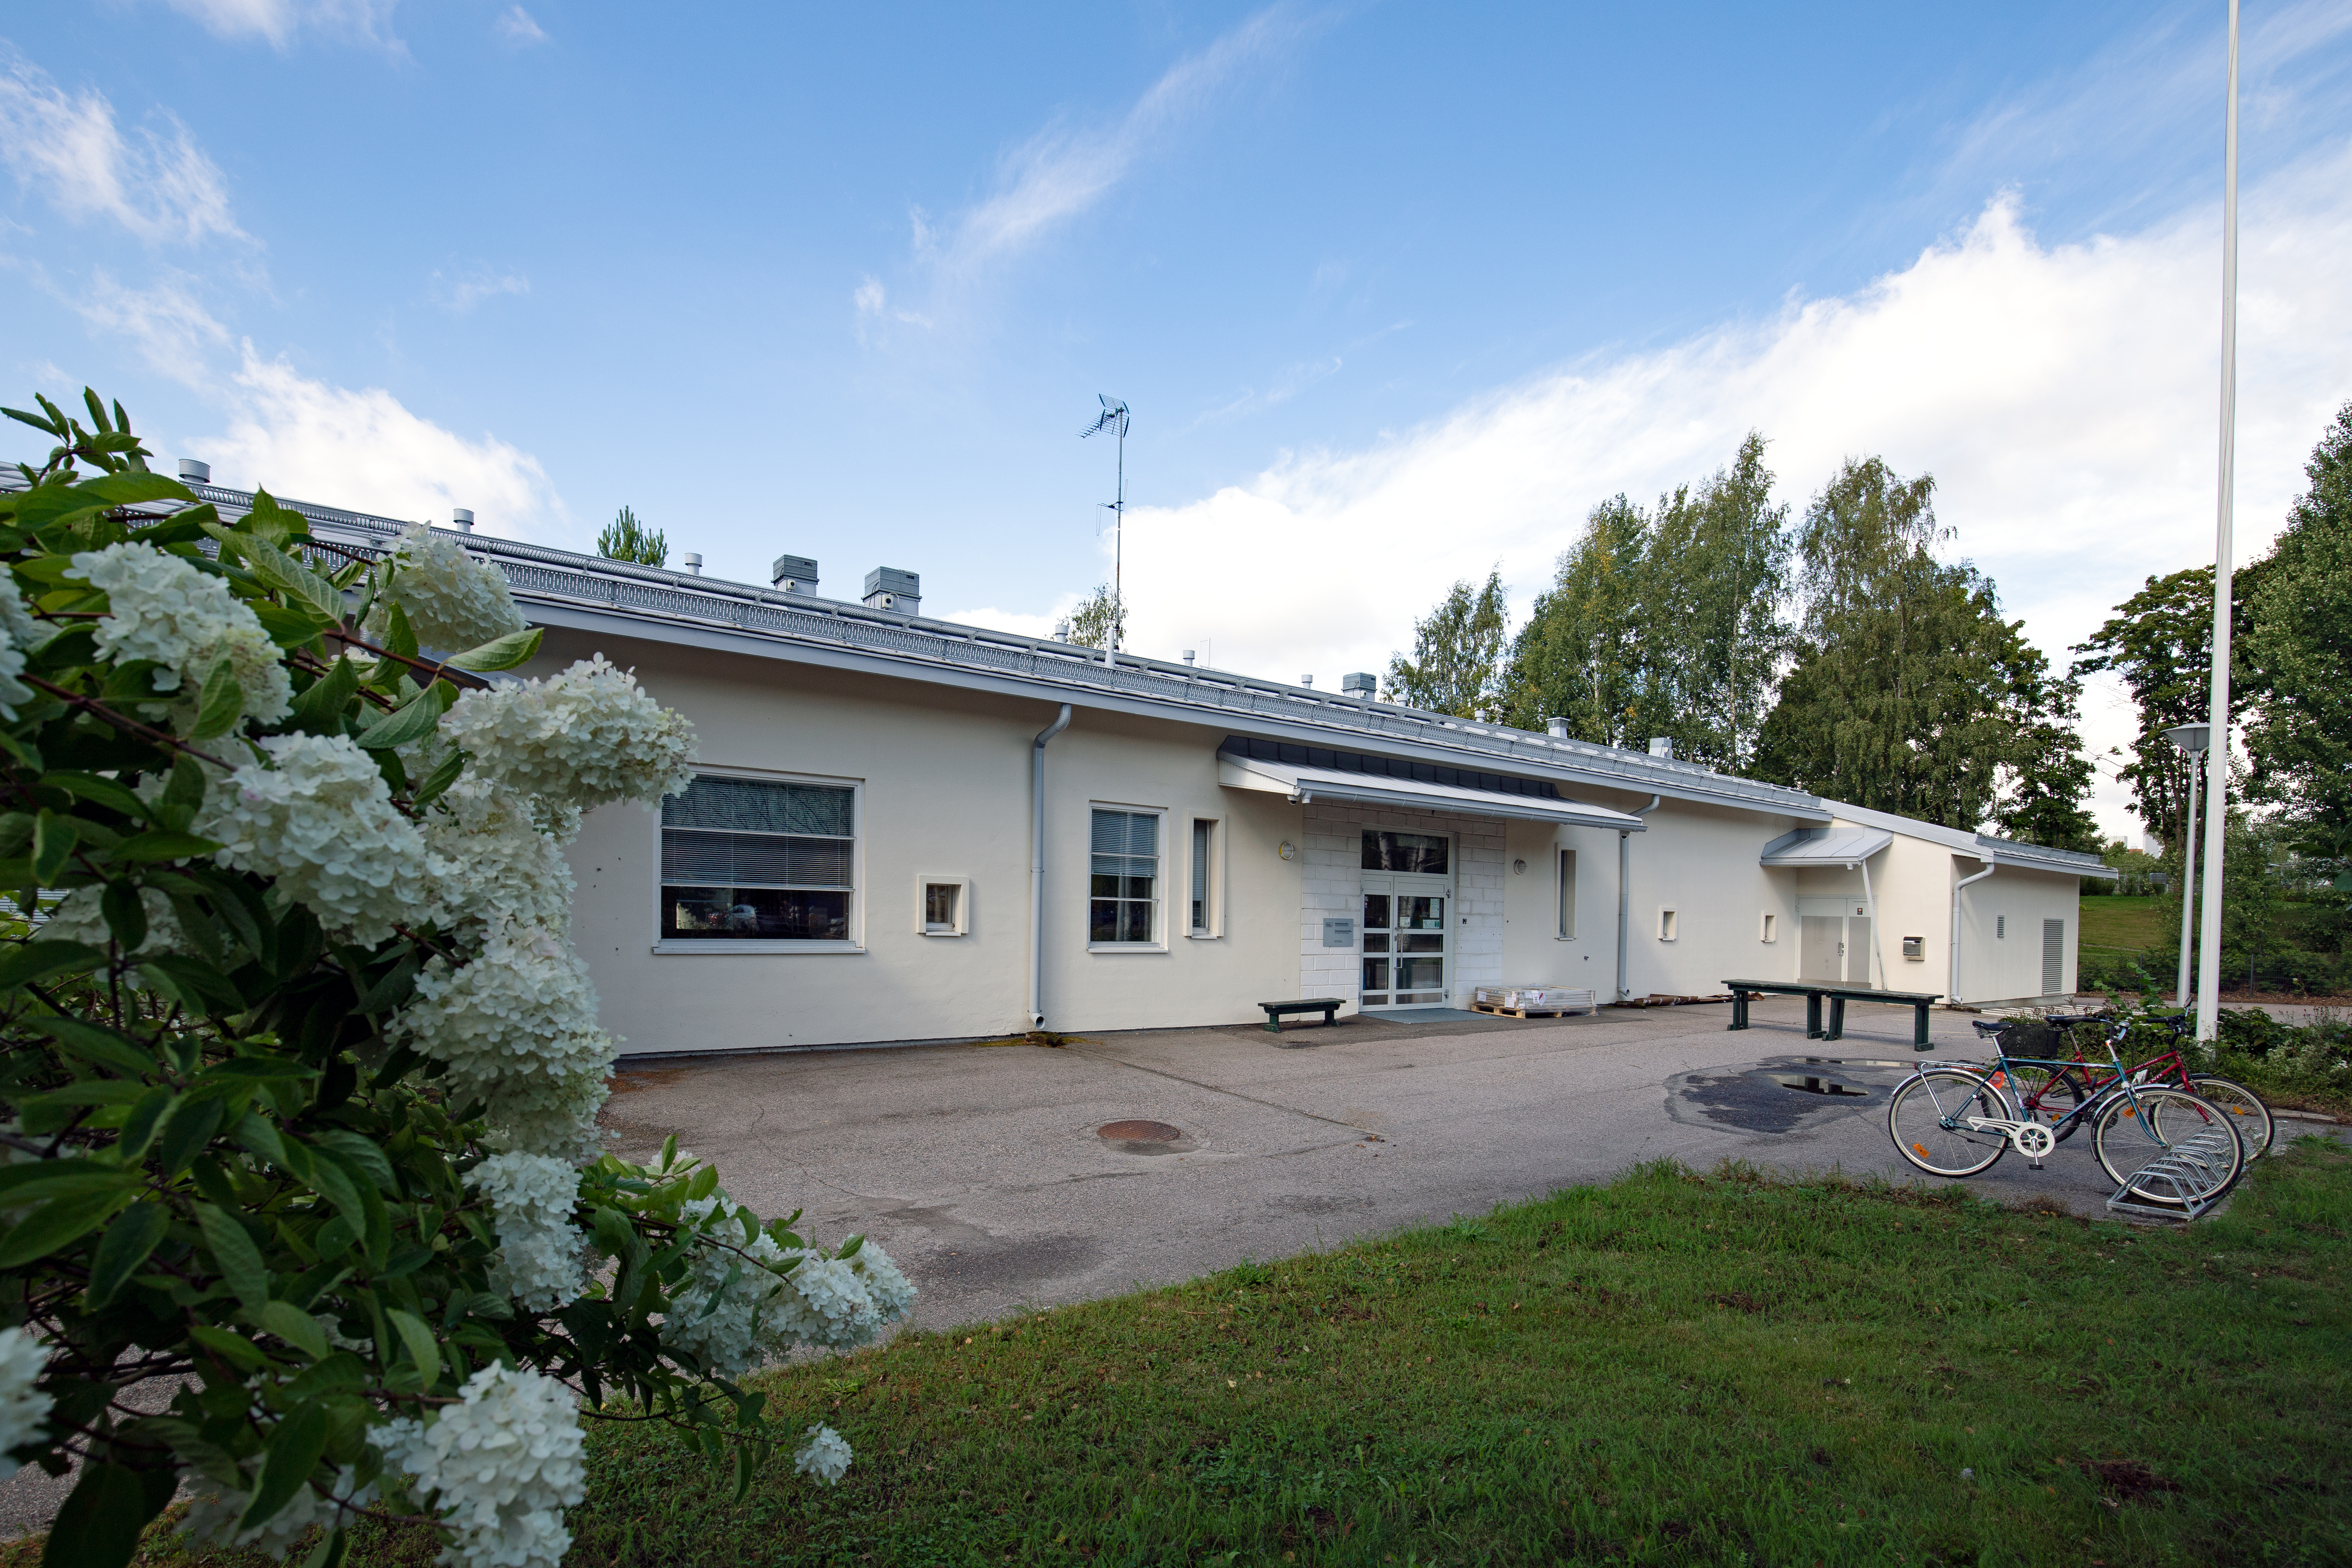 Picture of service point: Polku Activity Centre